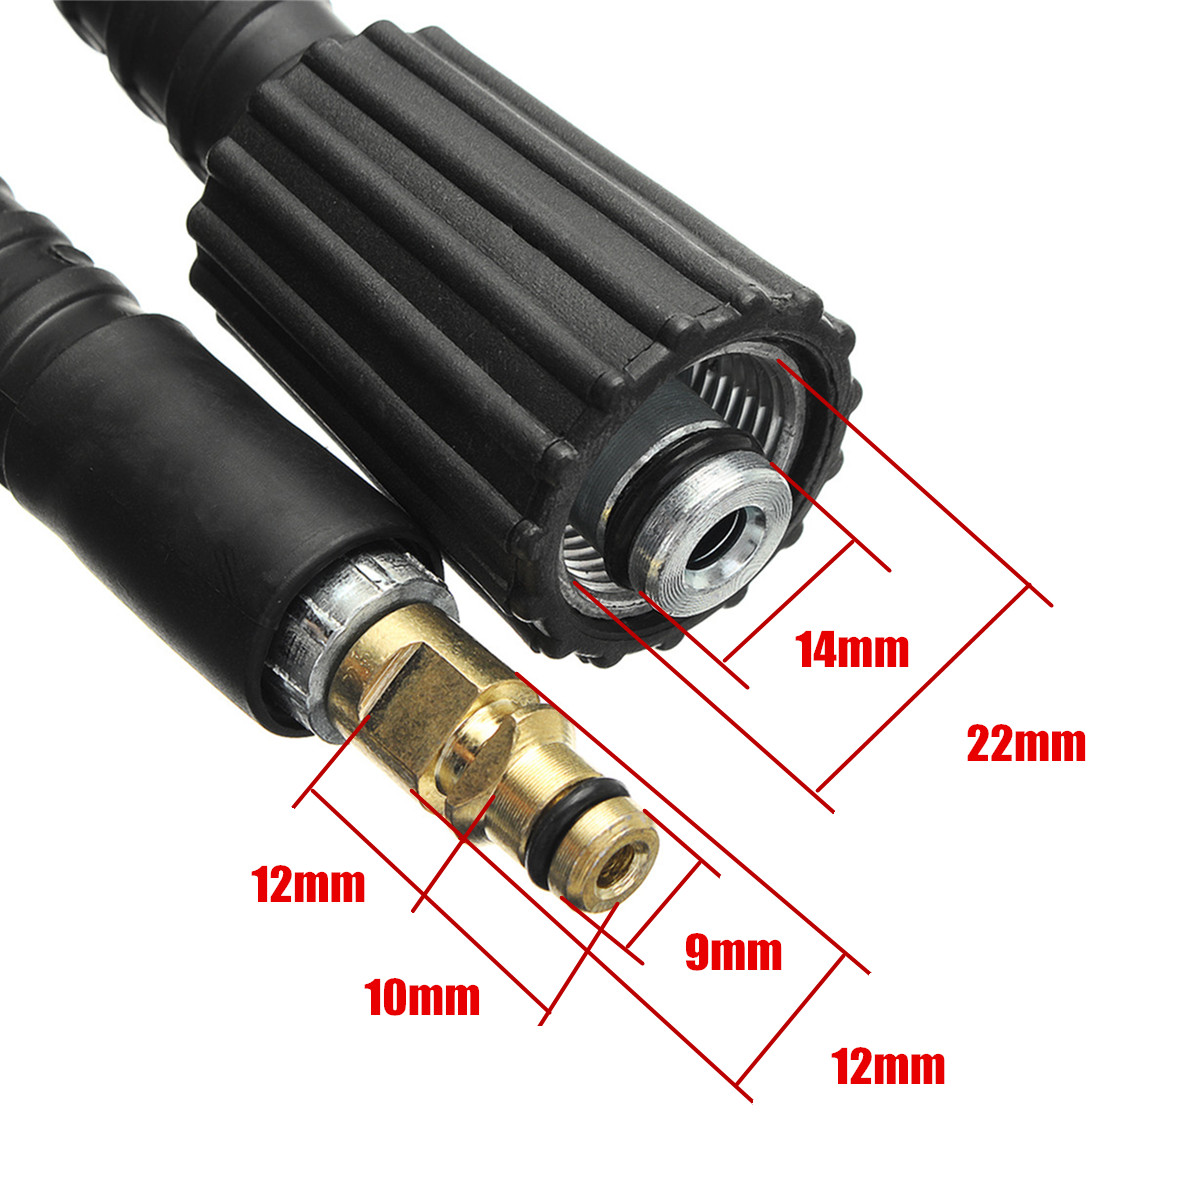 15m High Pressure Water Cleaning Hose for Karcher K2 K3 K4 K5 K6 K7 High Pressure Washer 10